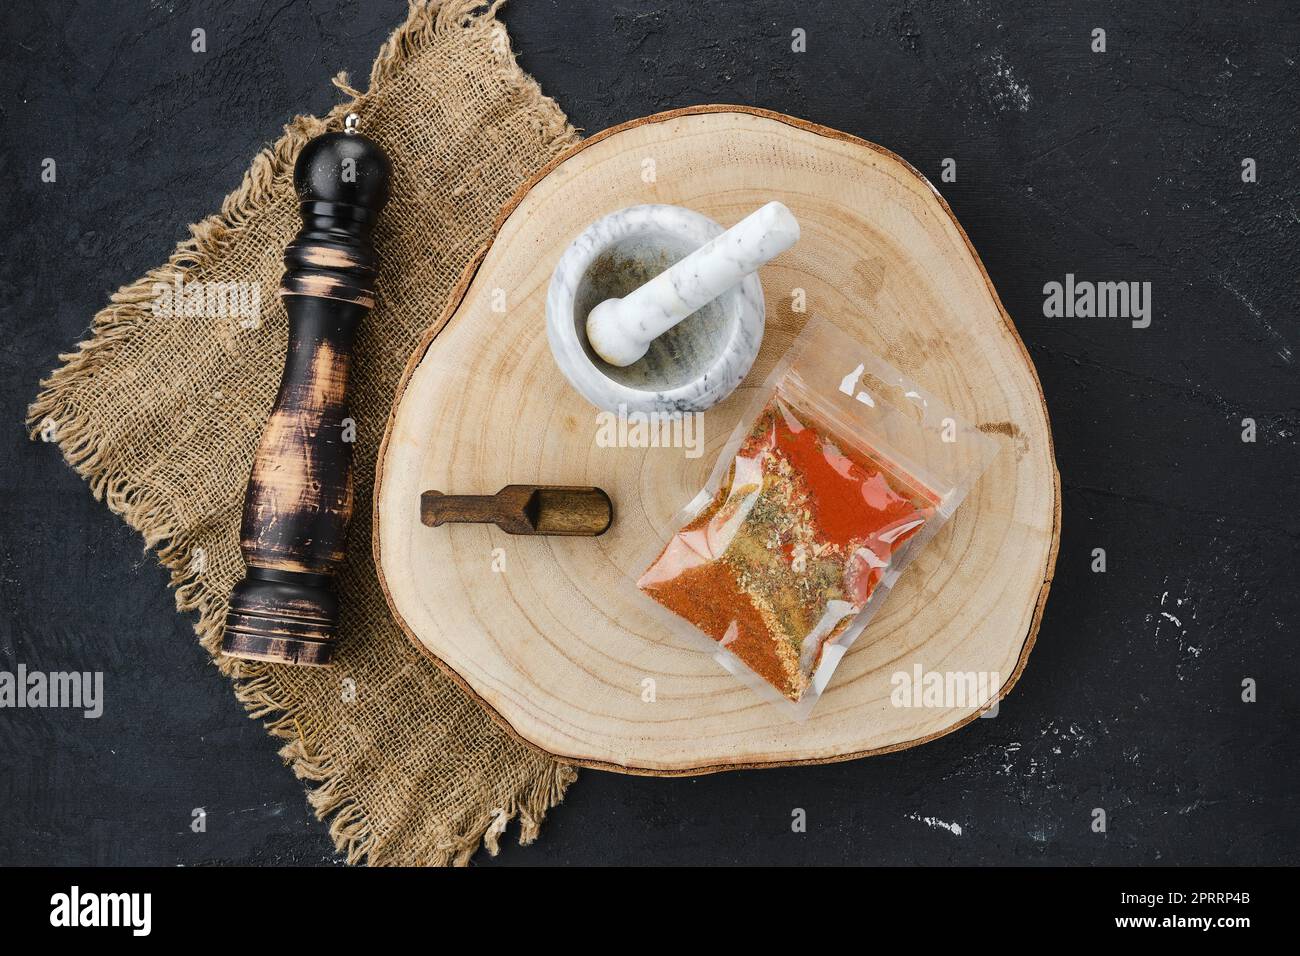 Top view of mixture of spices in plastic packaging Stock Photo